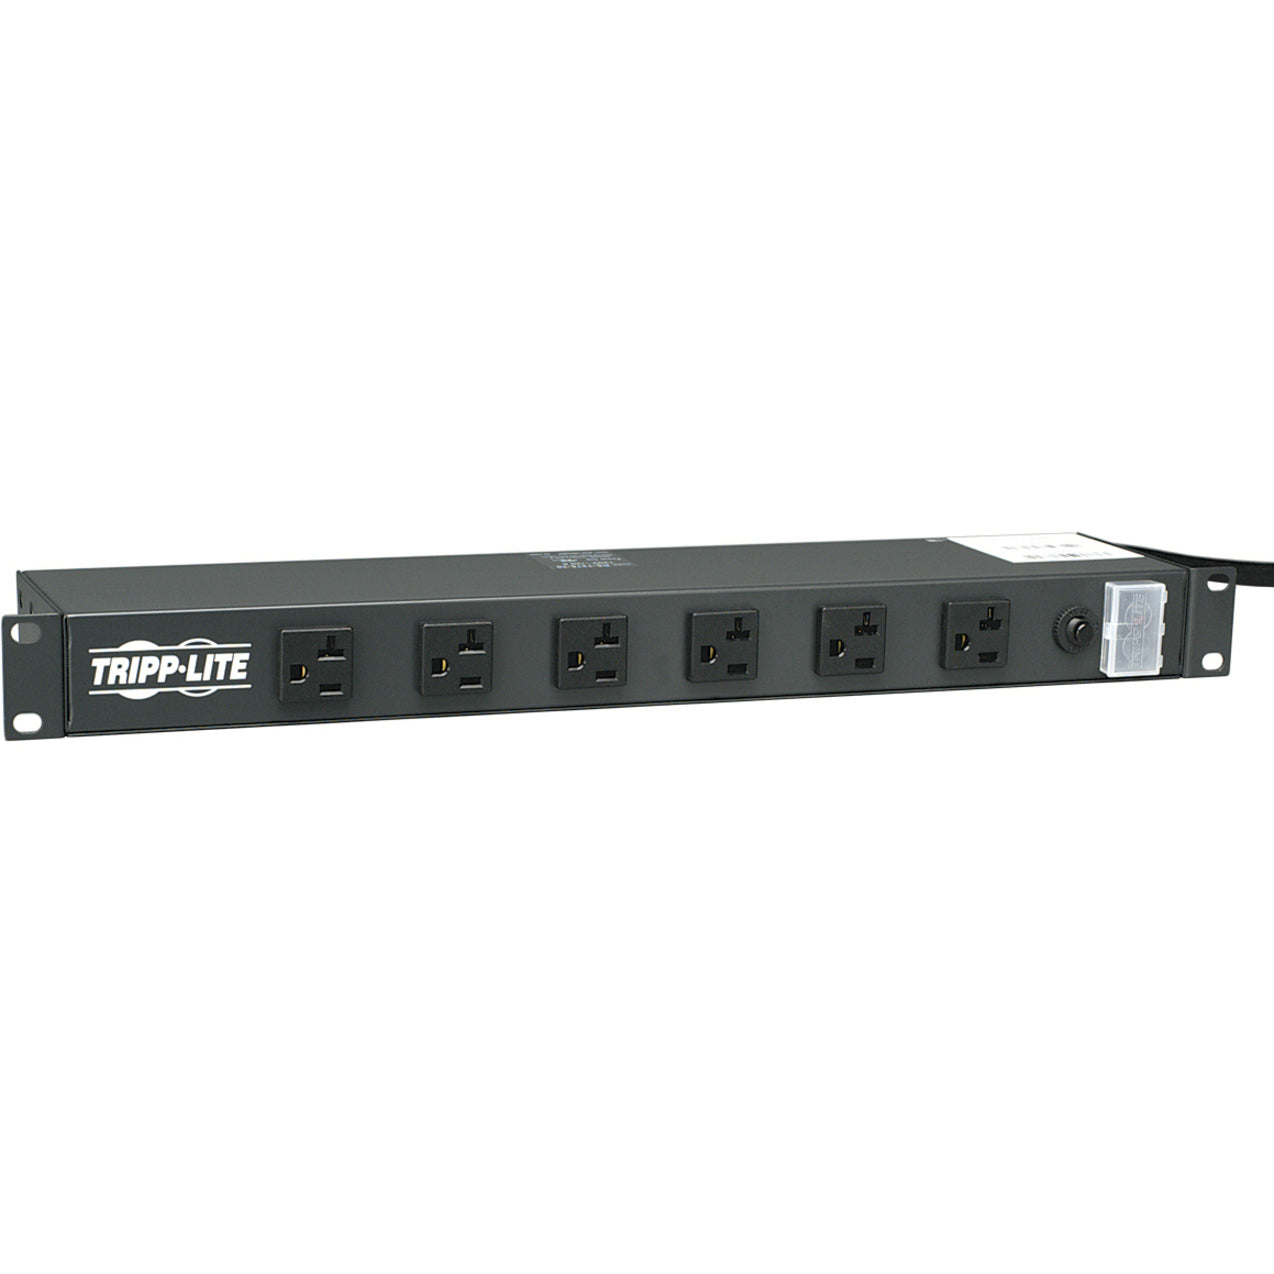 Tripp Lite RS-1215-20 Power Strip 120V AC, 20A Rackmount 12 Outlet 1U 6 Front 6 Rear 15ft Cord Metal